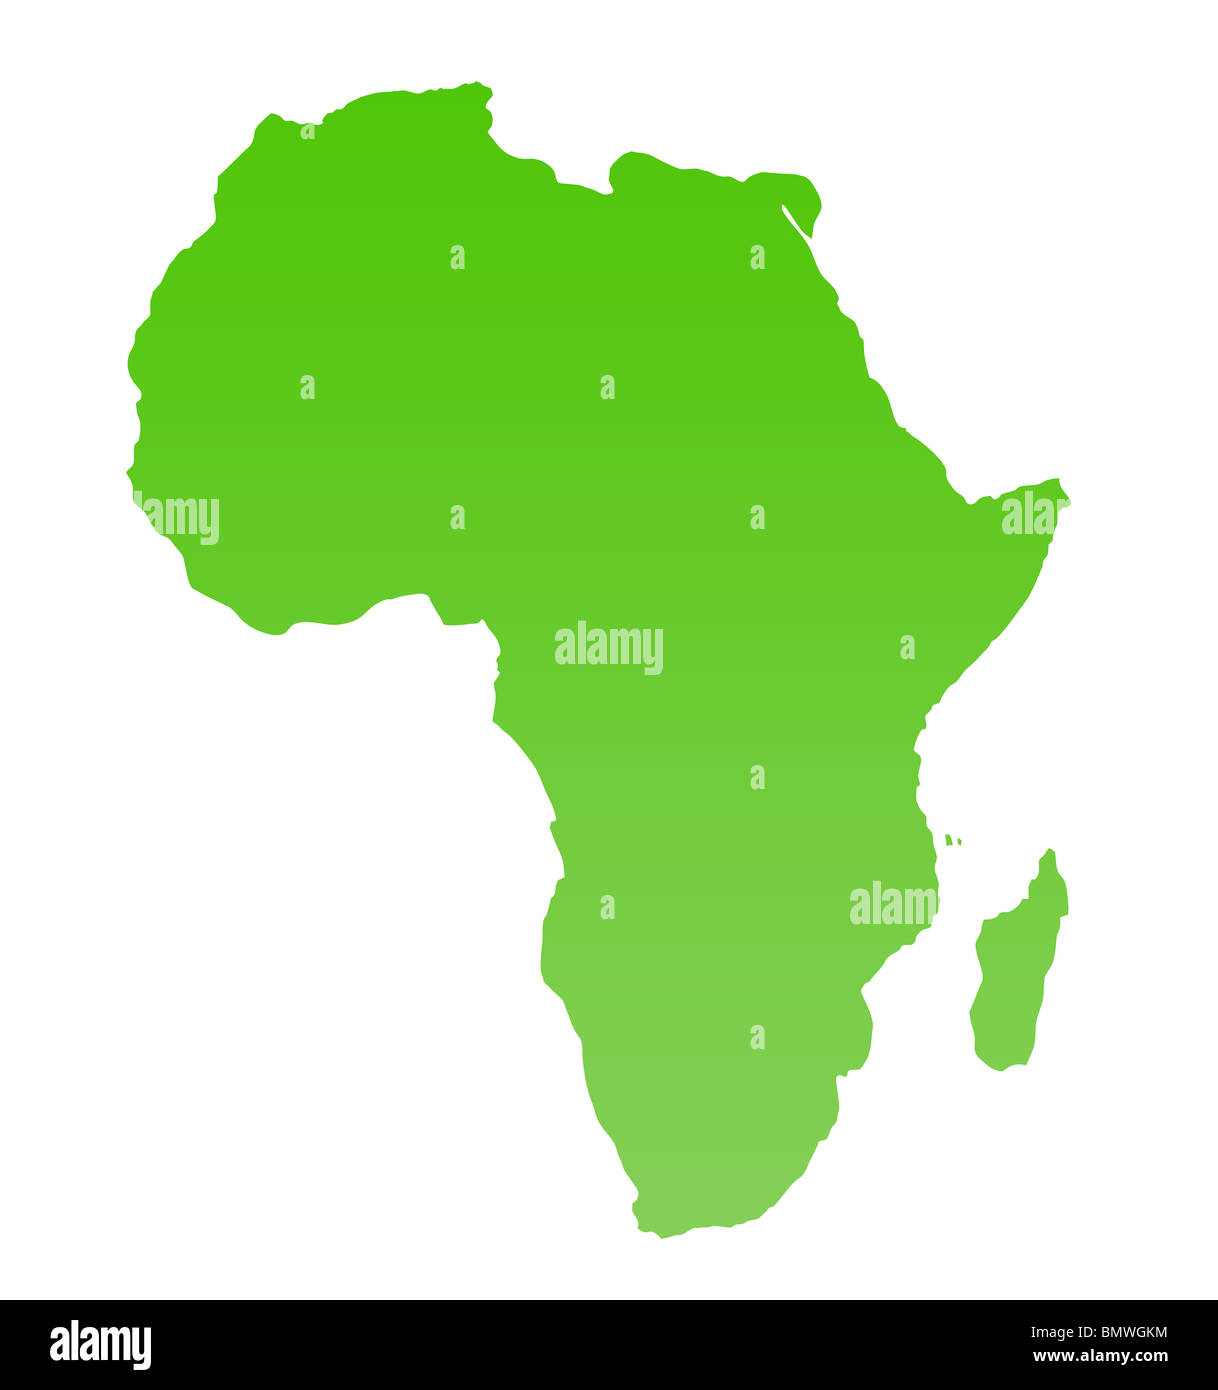 Green Africa map isolated on a white background. Stock Photo